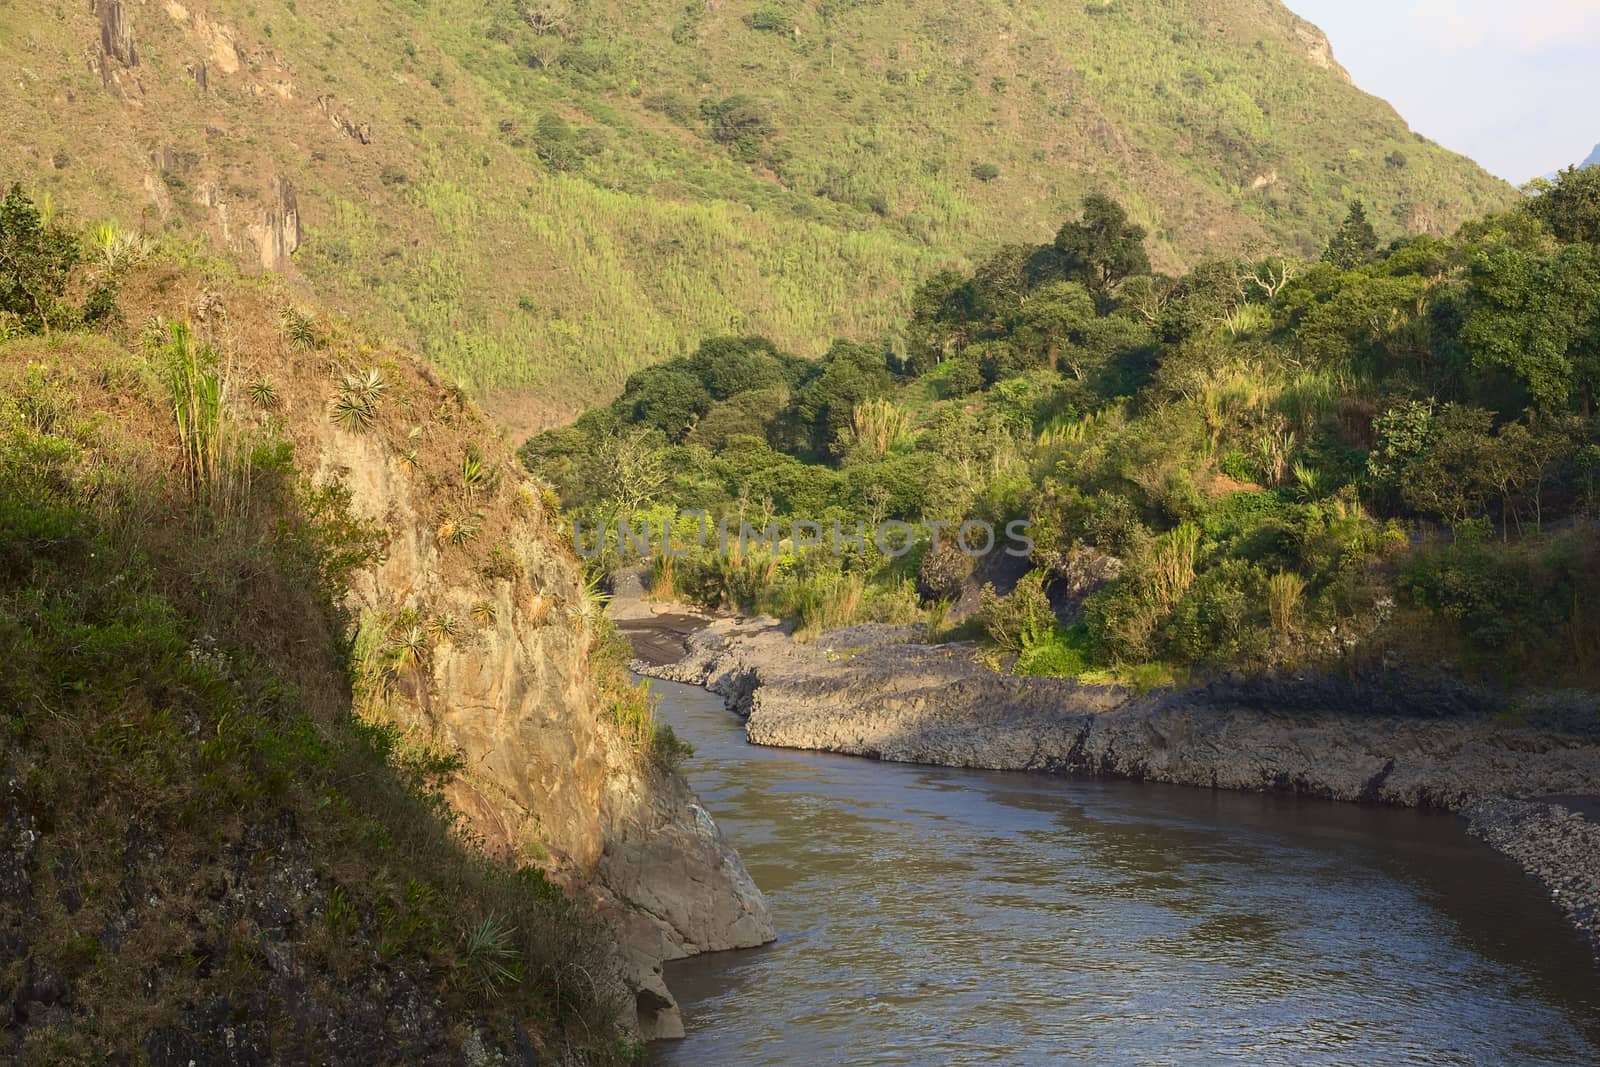 The Pastaza River in Ecuador, between the towns of Banos and Puyo